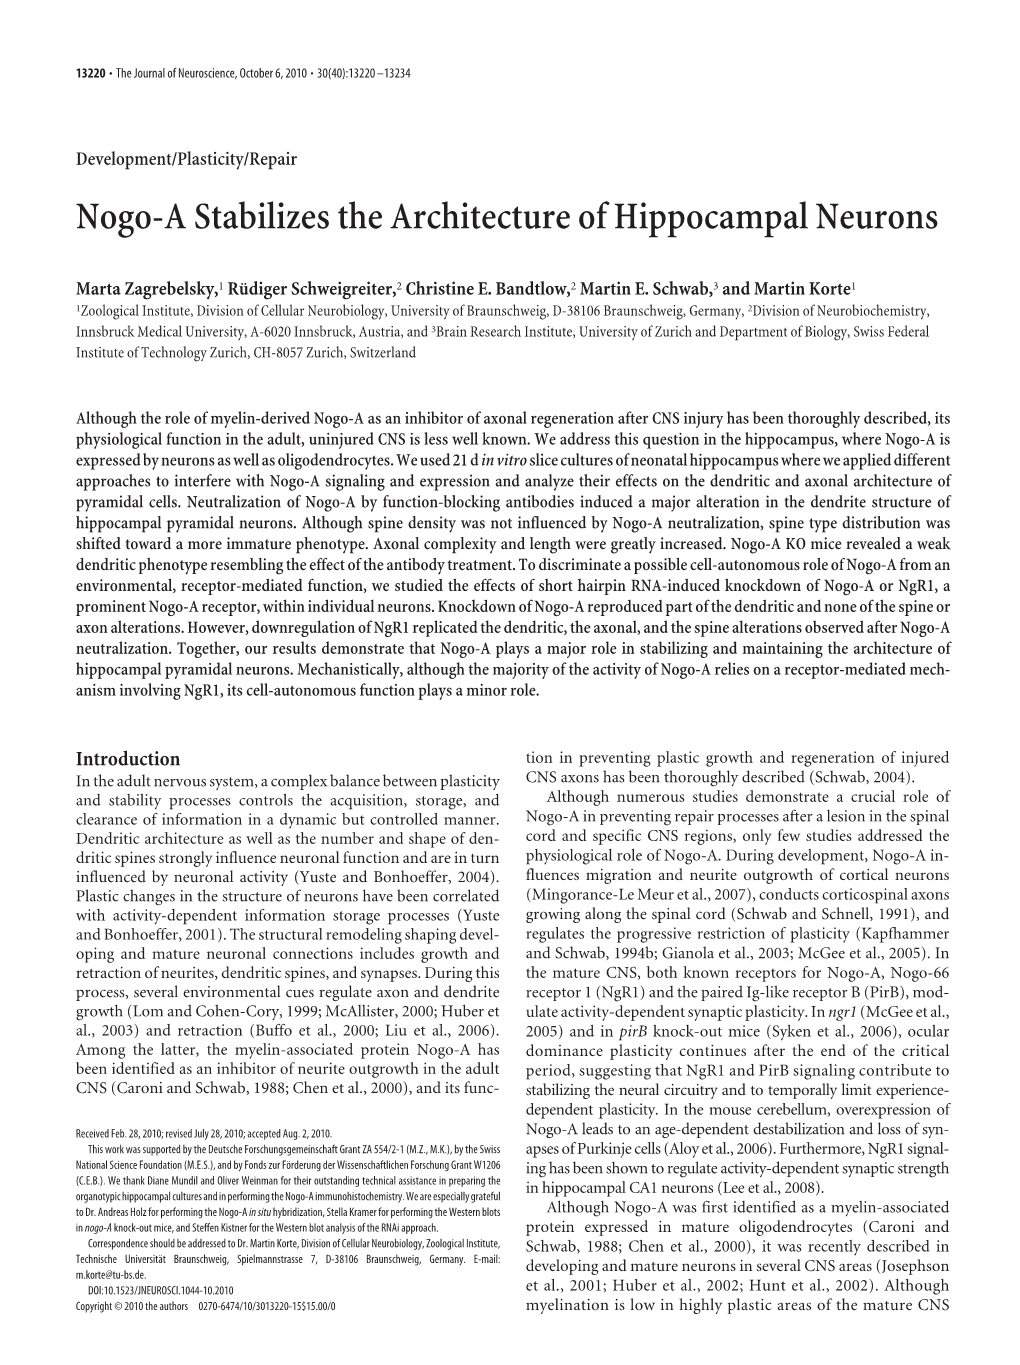 Nogo-A Stabilizes the Architecture of Hippocampal Neurons